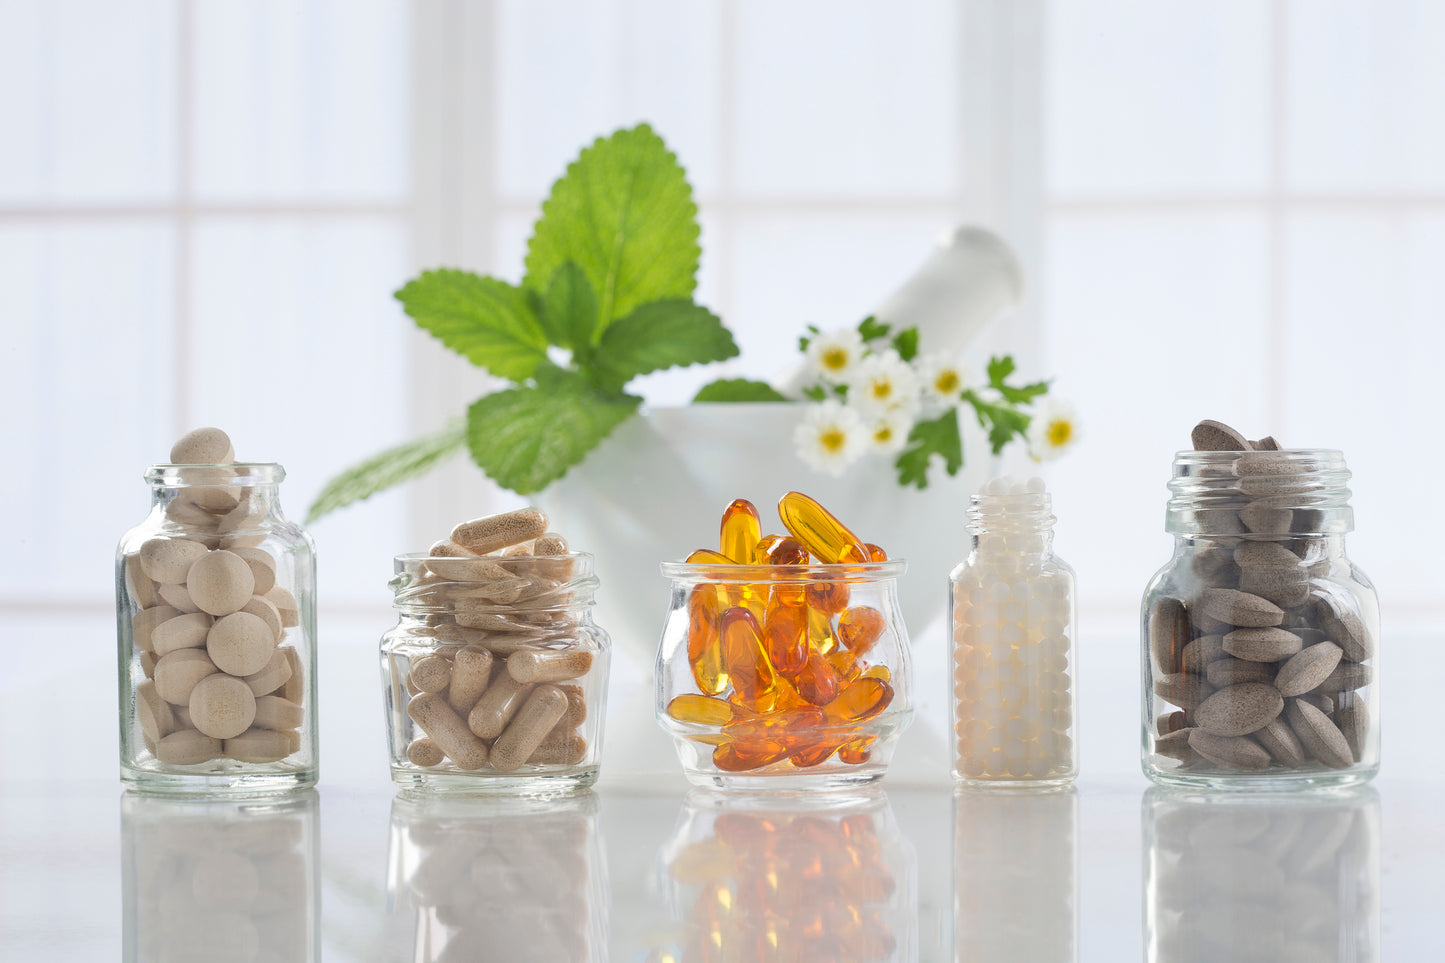 Five glass jars full of prebiotic and probiotic supplements